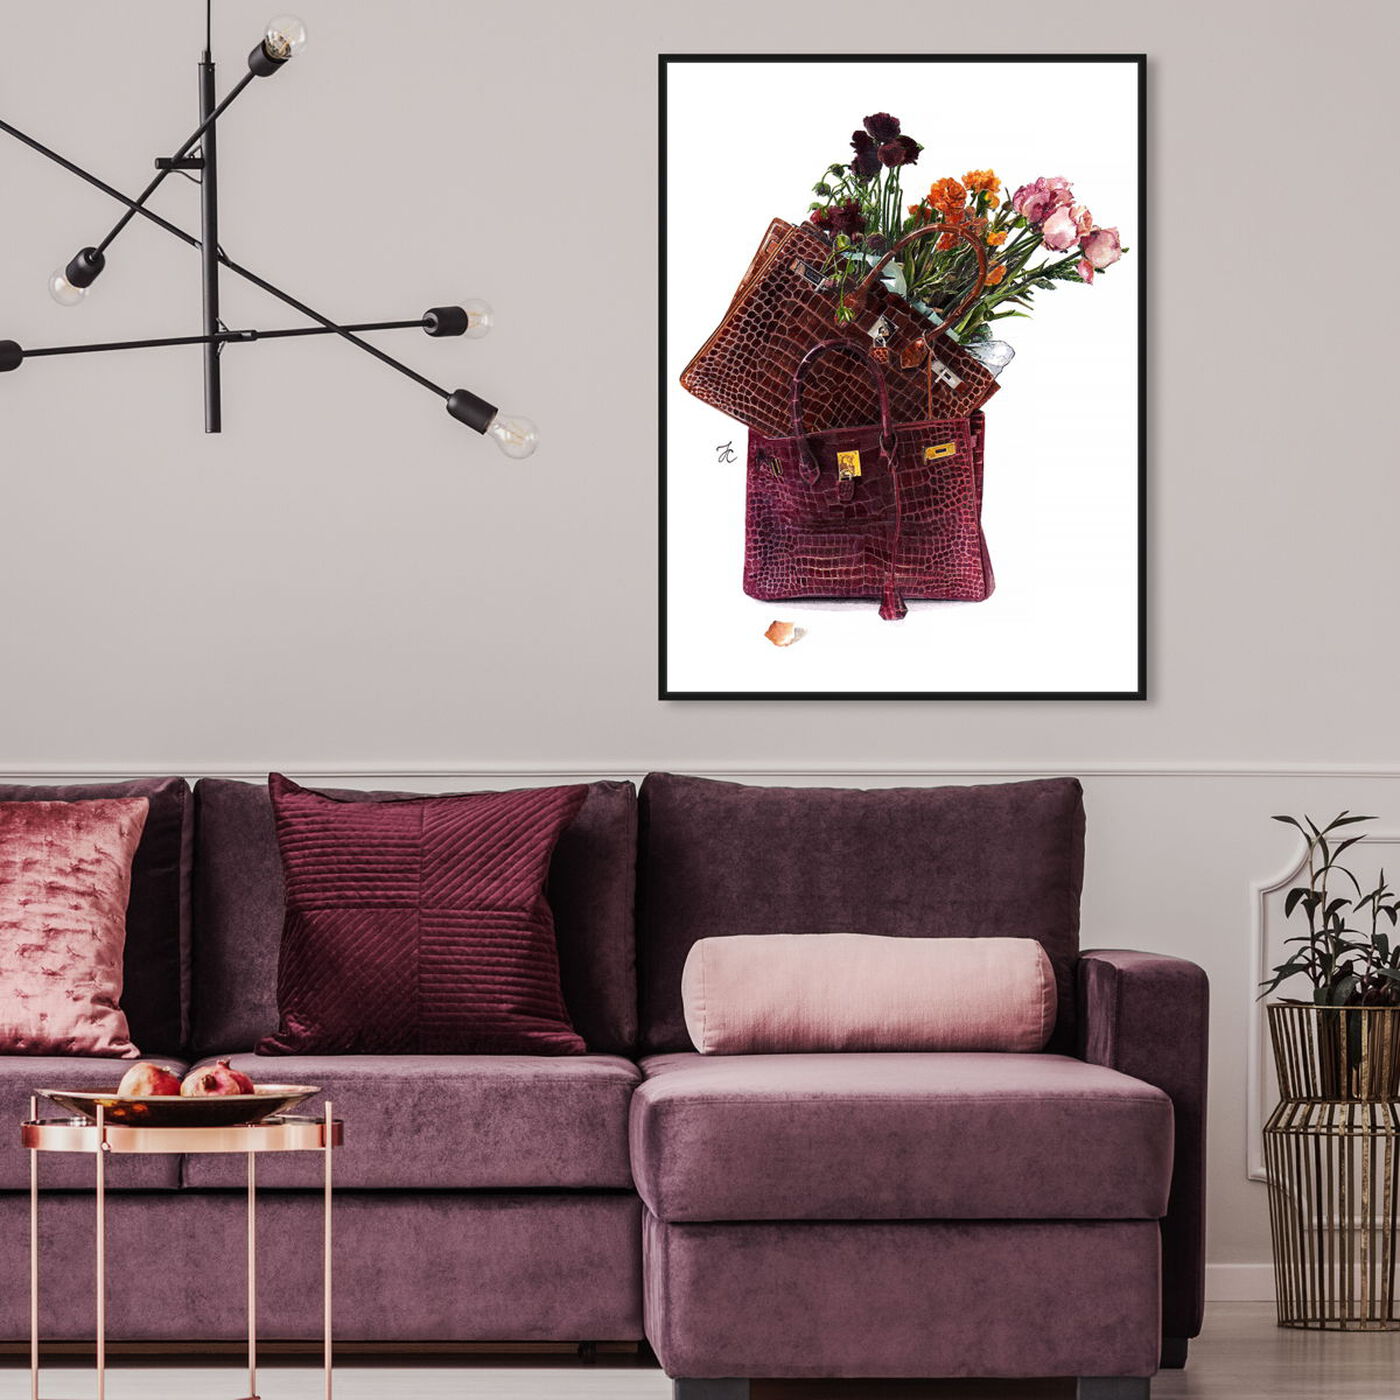 Hanging view of Doll Memories - Flowers featuring fashion and glam and handbags art.